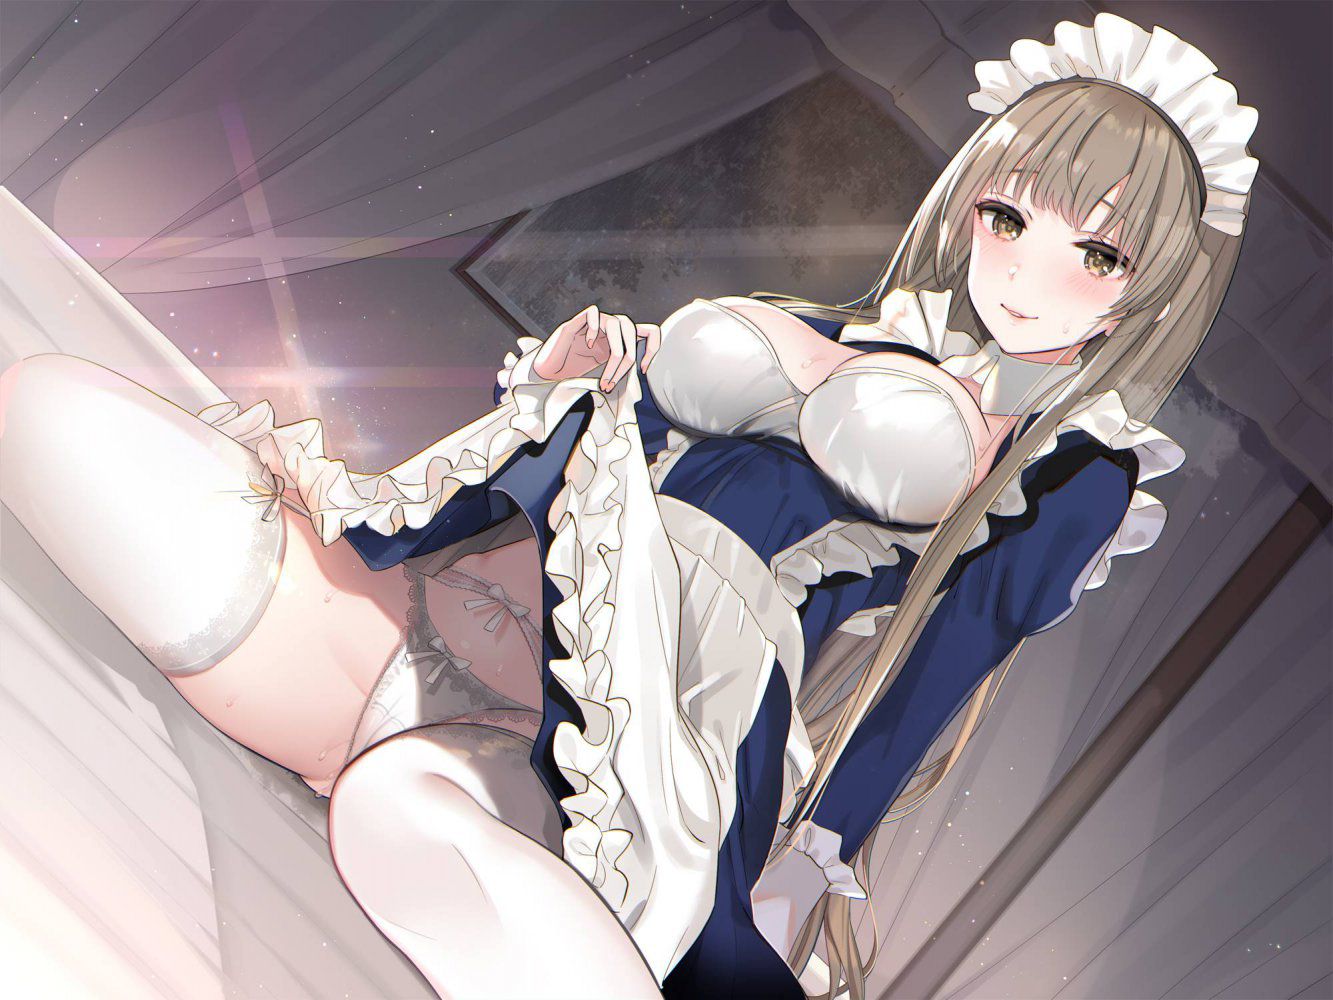 Threads that randomly paste erotic images of maids 3